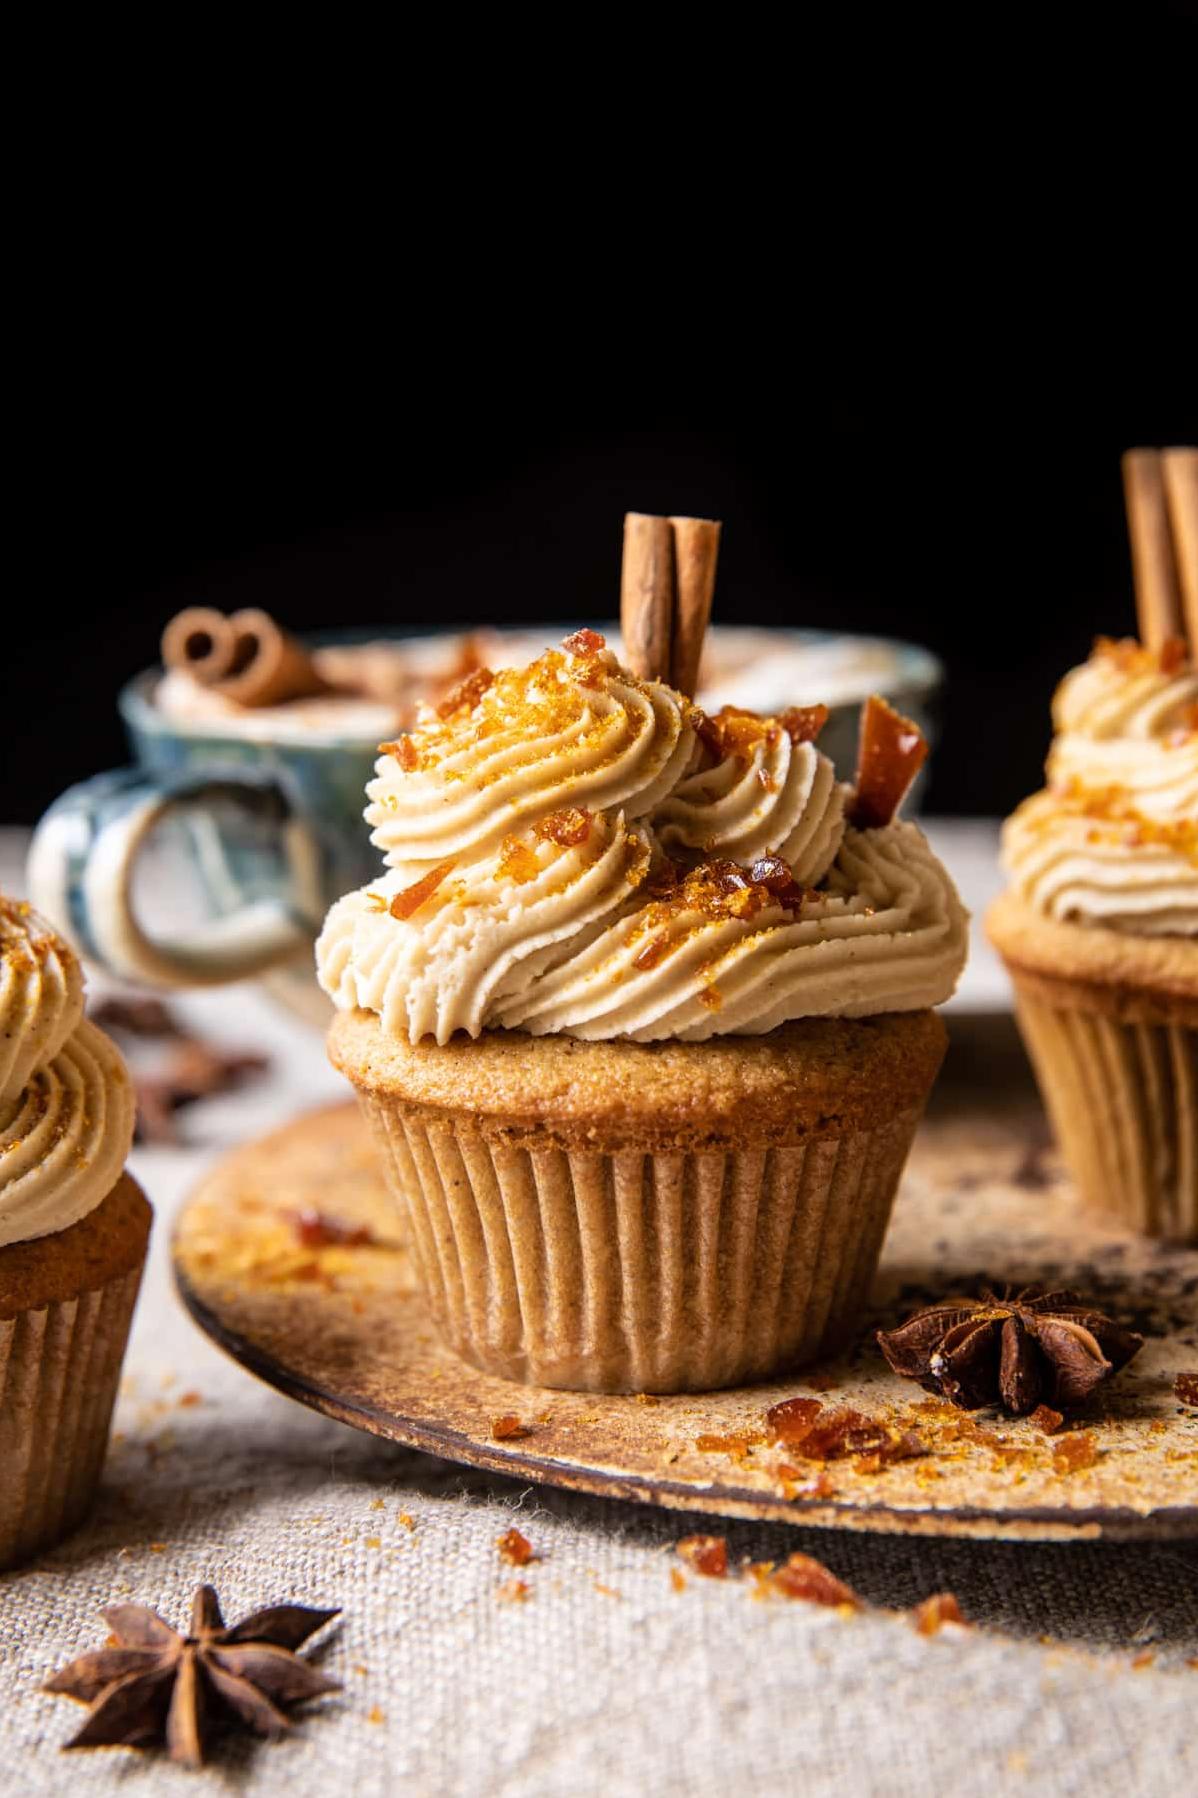  Perfect for any occasion, these cupcakes are easy to make and finger-licking delicious.